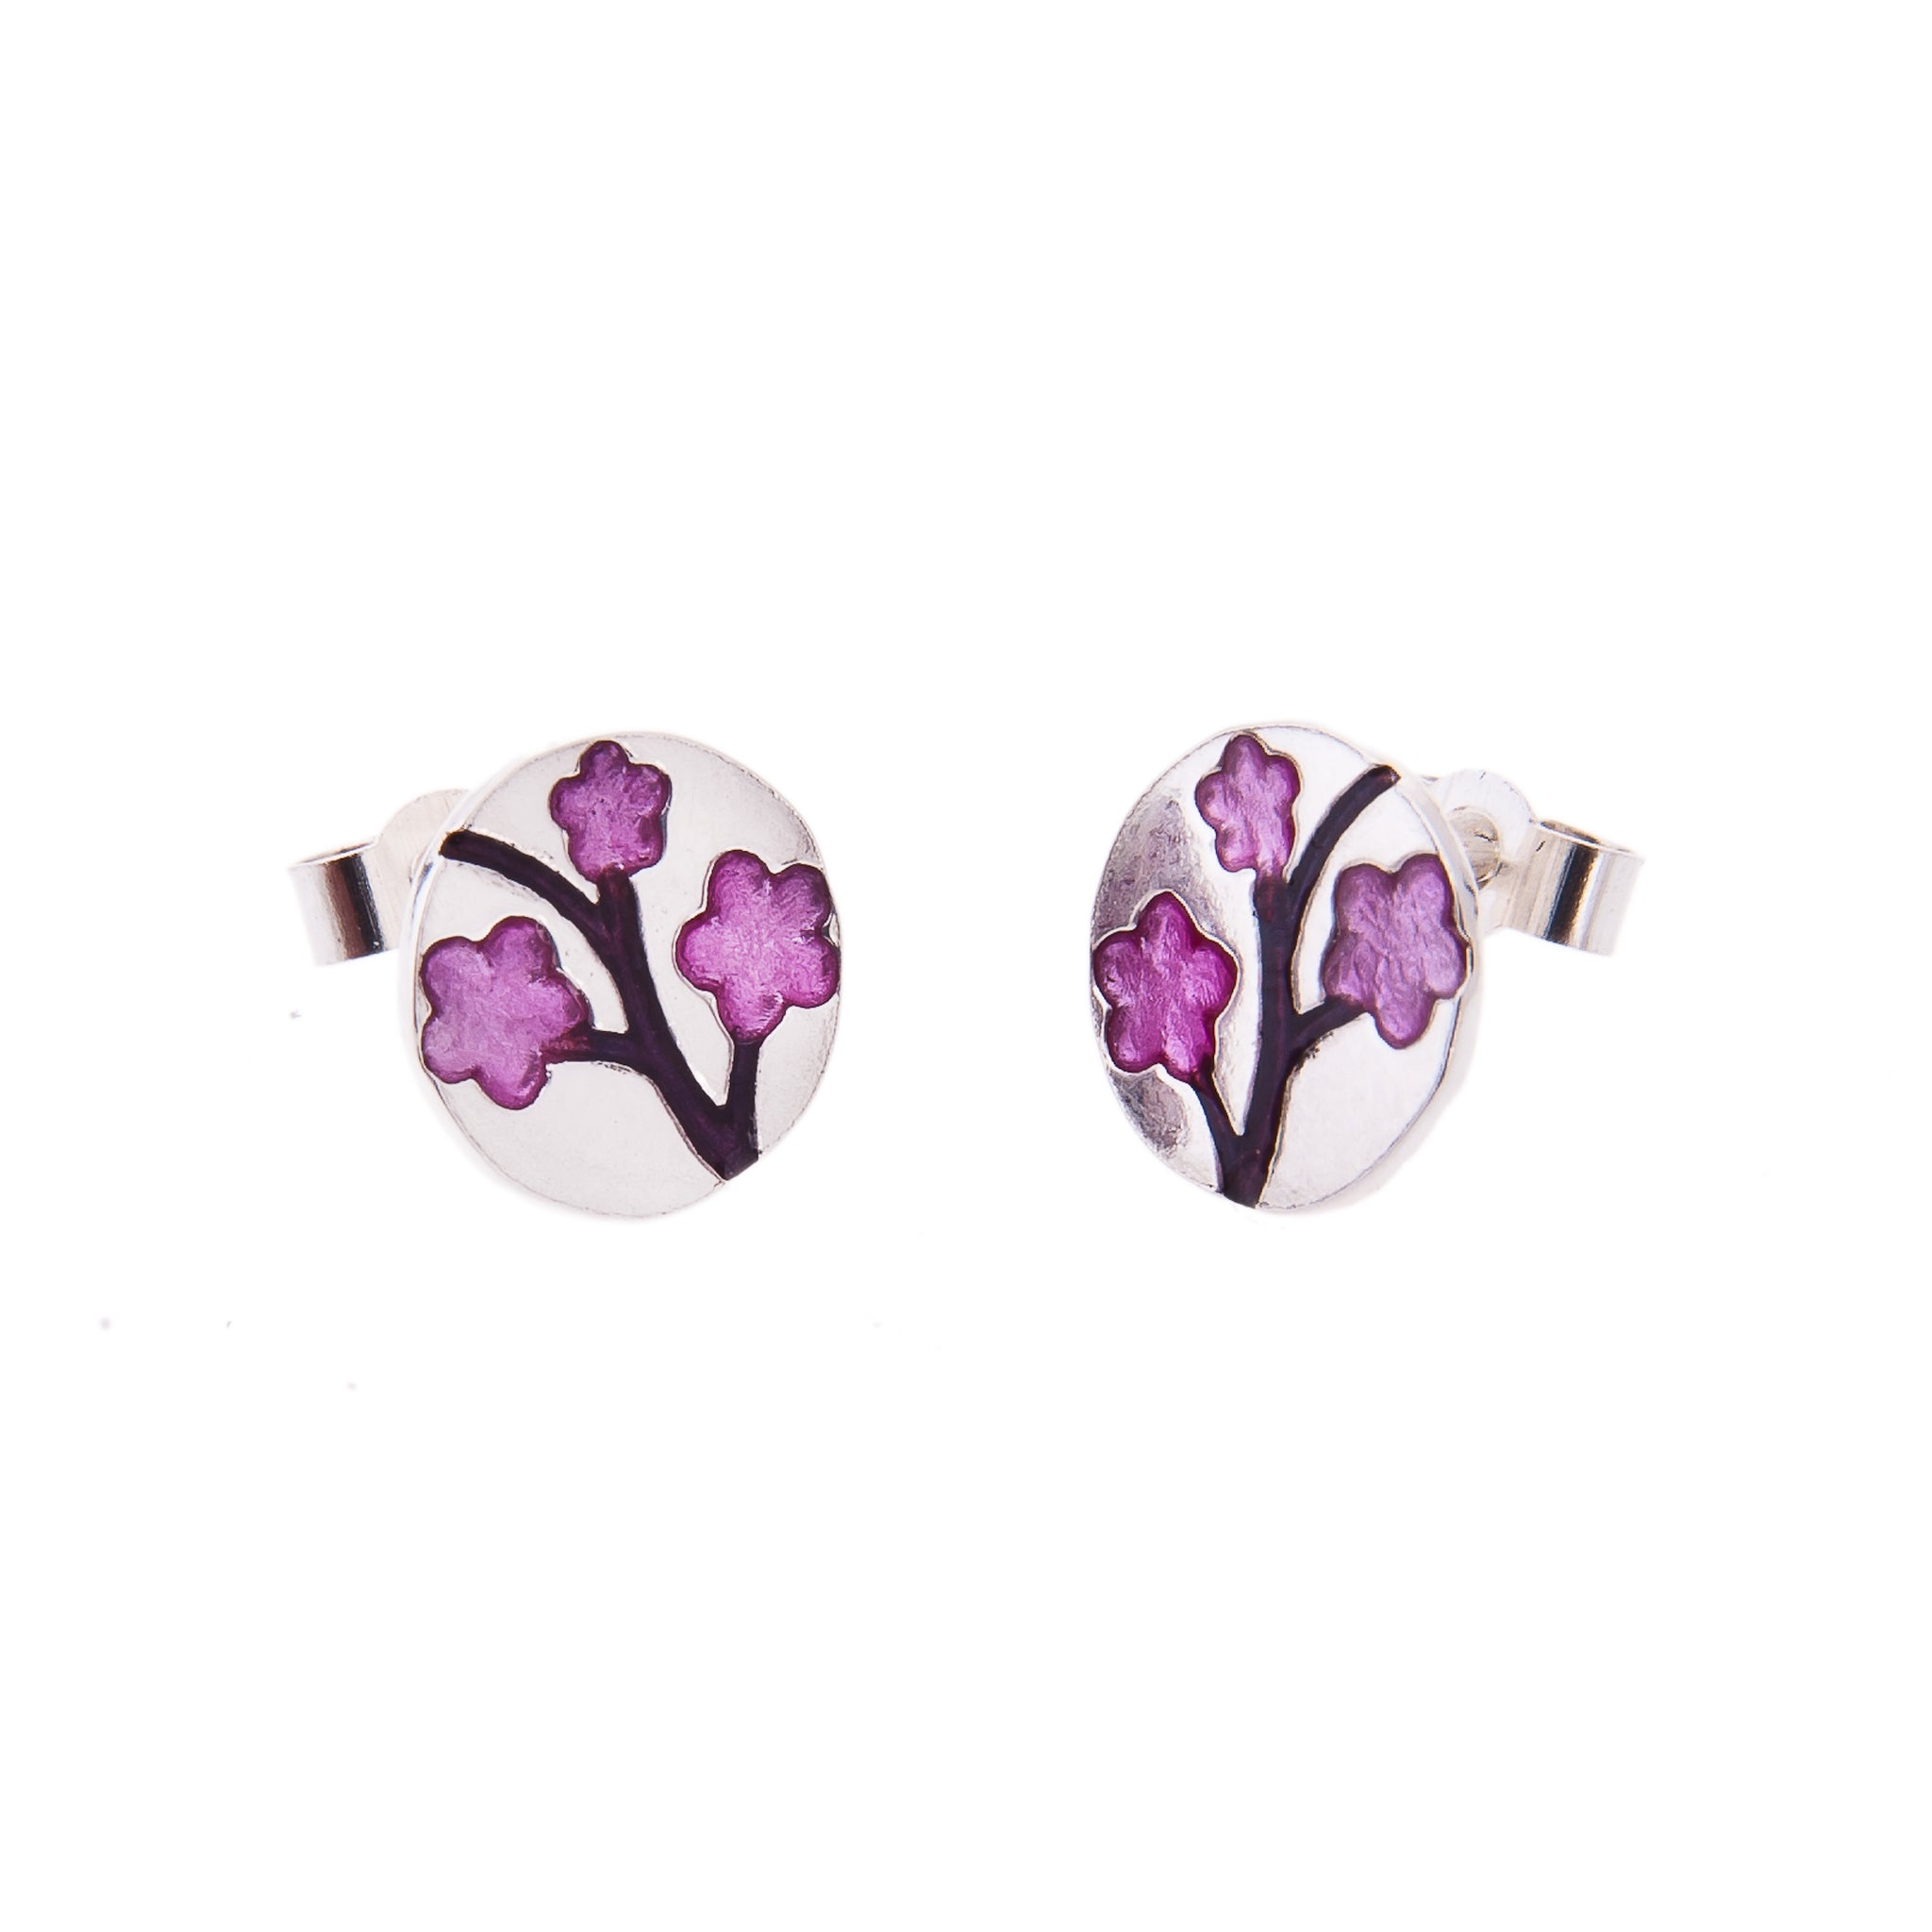 Round Silver stud earrings with cherry blossom detail and pink flowers, Kate Wimbush Jewellery